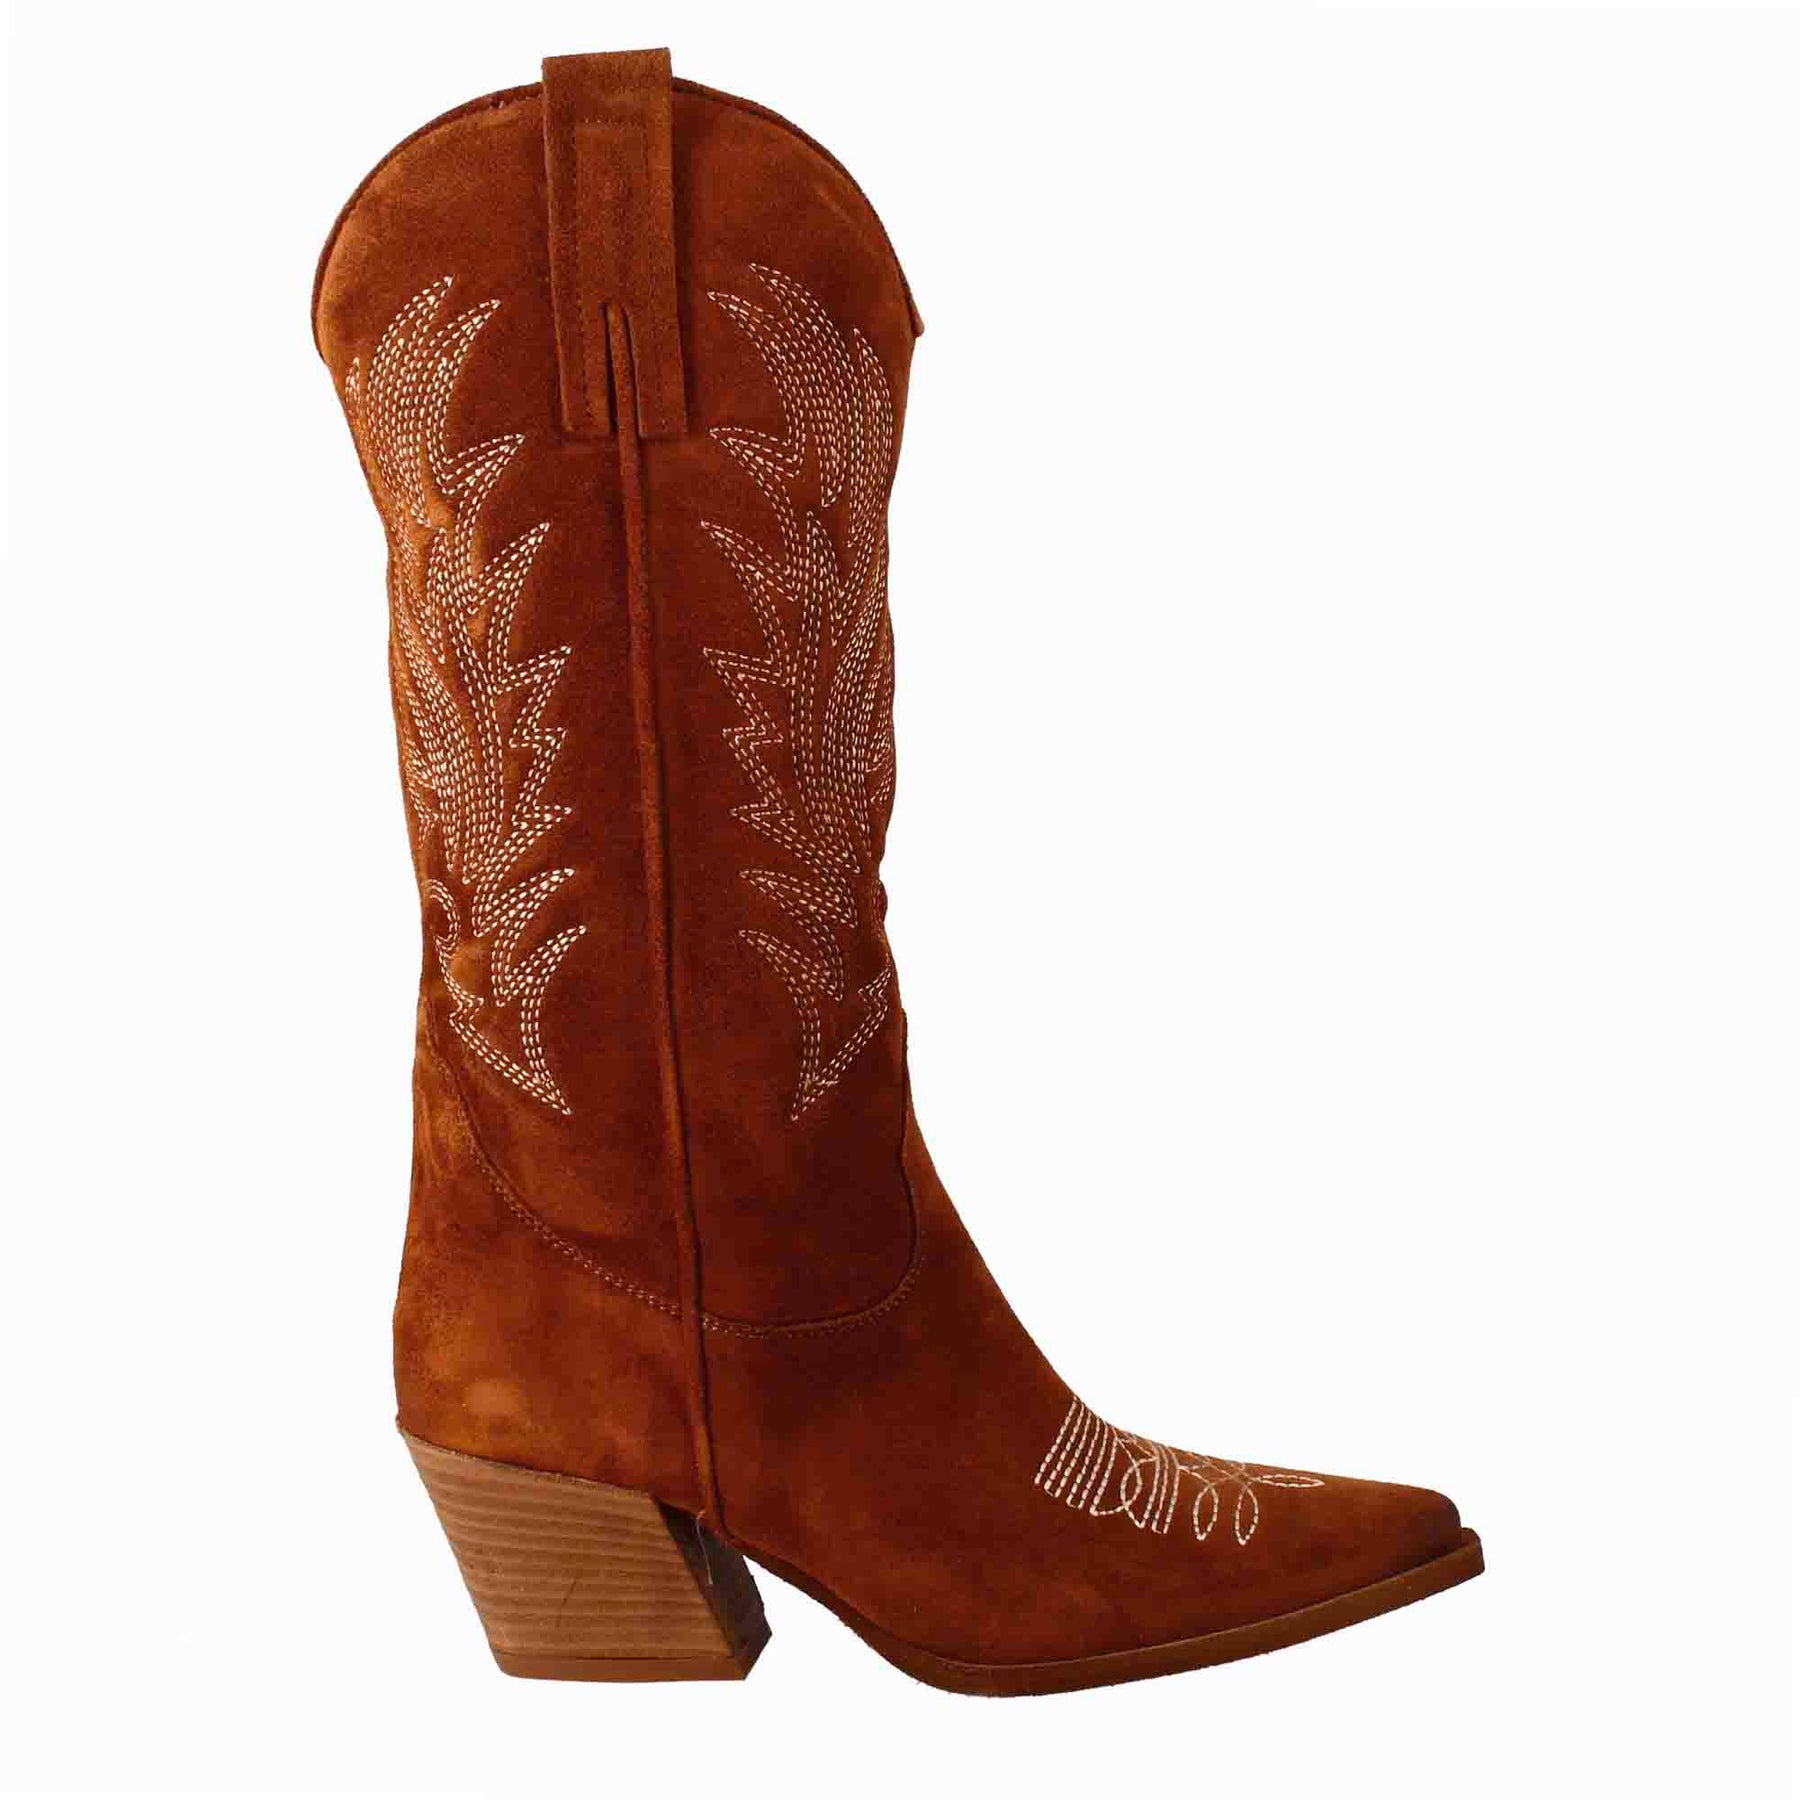 Women's medium Texan boots in brown suede with embroidery.